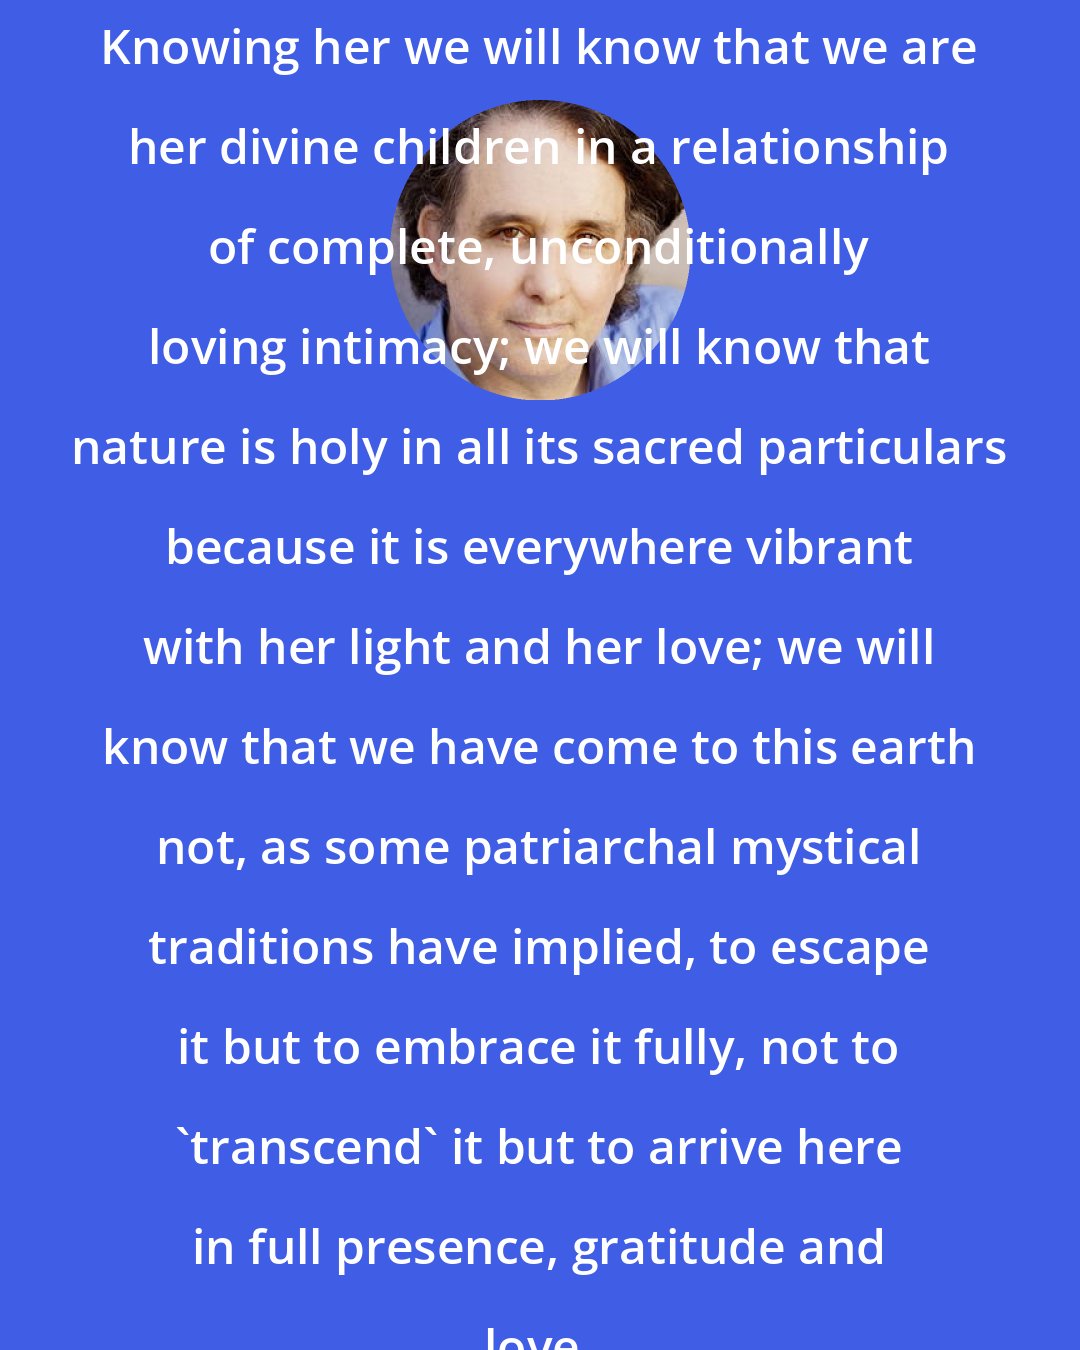 Andrew Harvey: Knowing her we will know that we are her divine children in a relationship of complete, unconditionally loving intimacy; we will know that nature is holy in all its sacred particulars because it is everywhere vibrant with her light and her love; we will know that we have come to this earth not, as some patriarchal mystical traditions have implied, to escape it but to embrace it fully, not to 'transcend' it but to arrive here in full presence, gratitude and love.